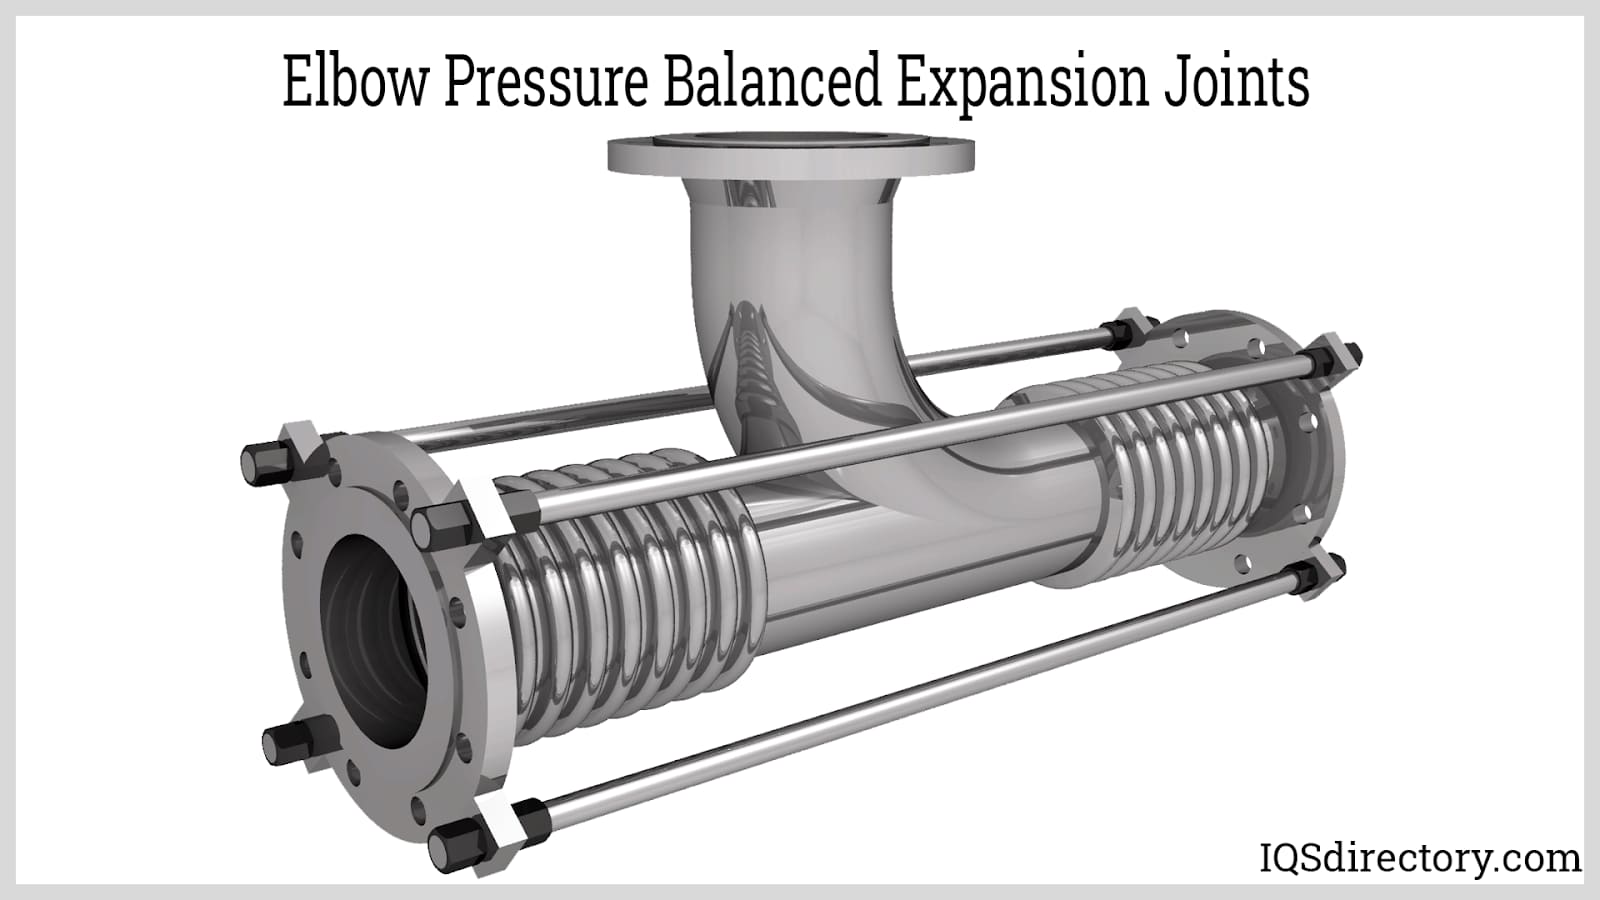 Elbow Pressure Balanced Expansion Joints